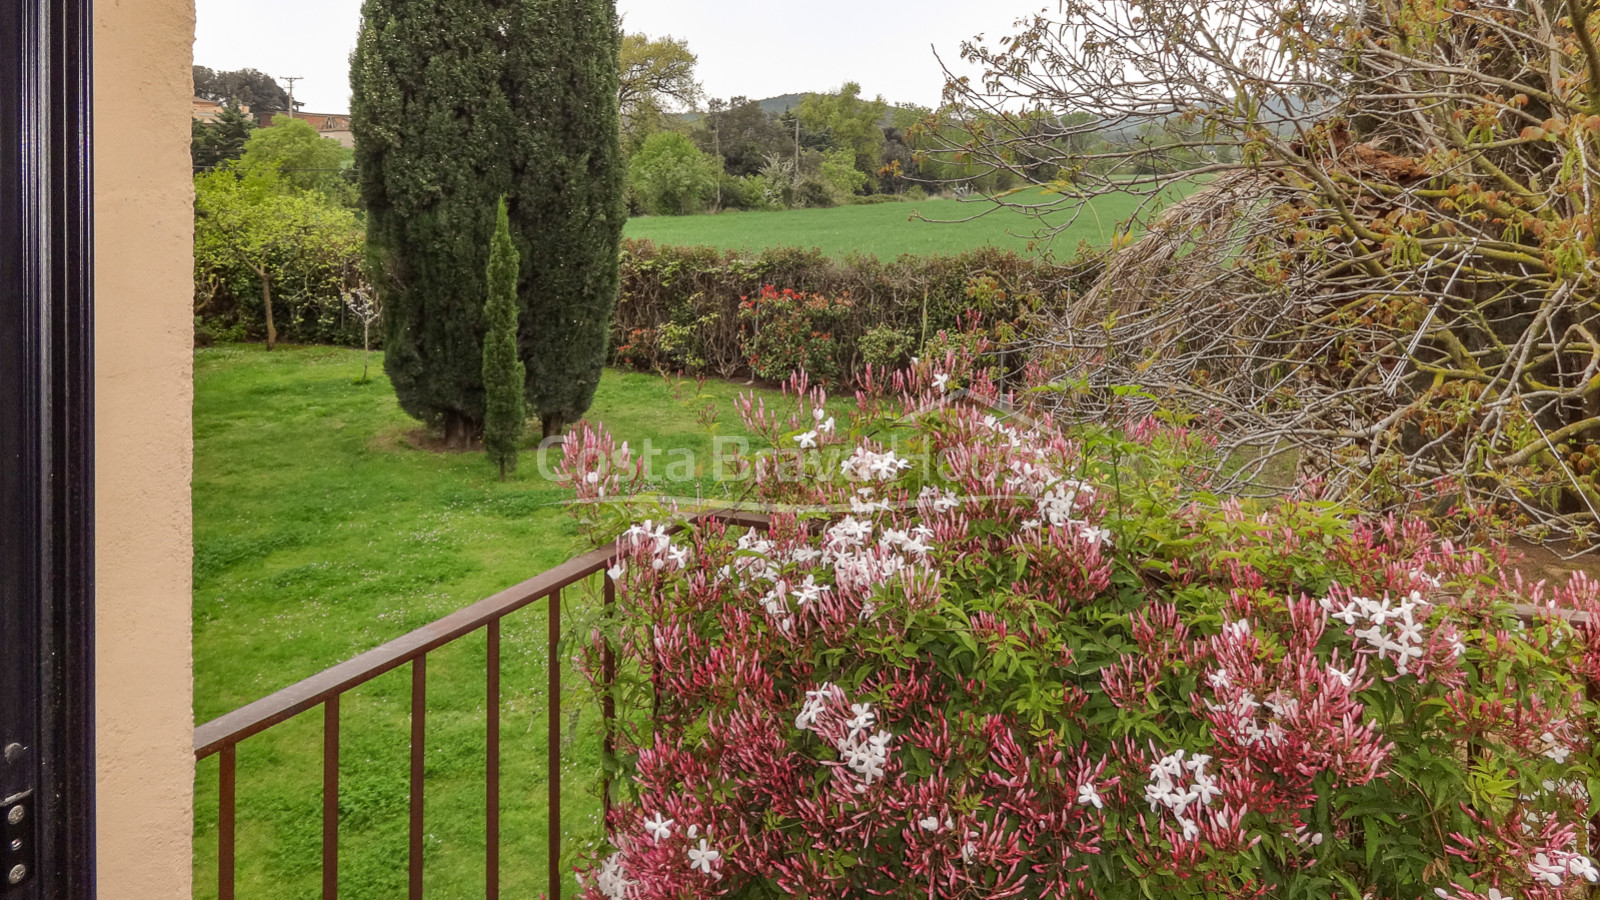 Stone house with 1.000 m² of garden for sale in Ventalló, a small village in the Alt Empordà